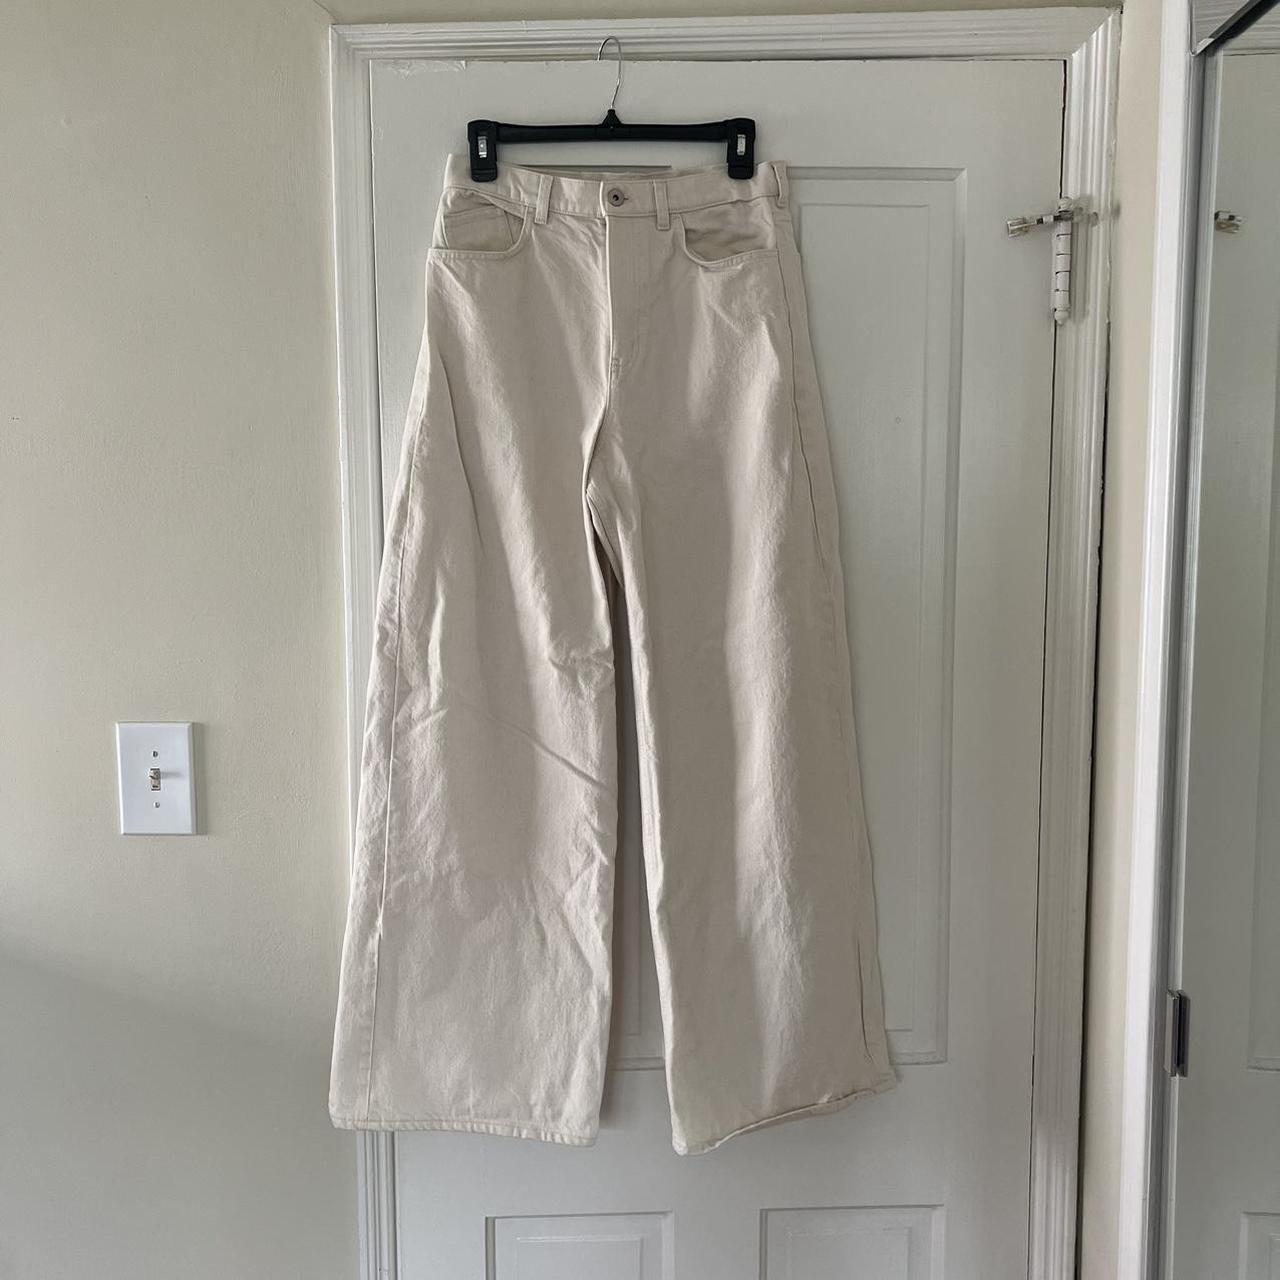 COS Women's Cream and White Jeans